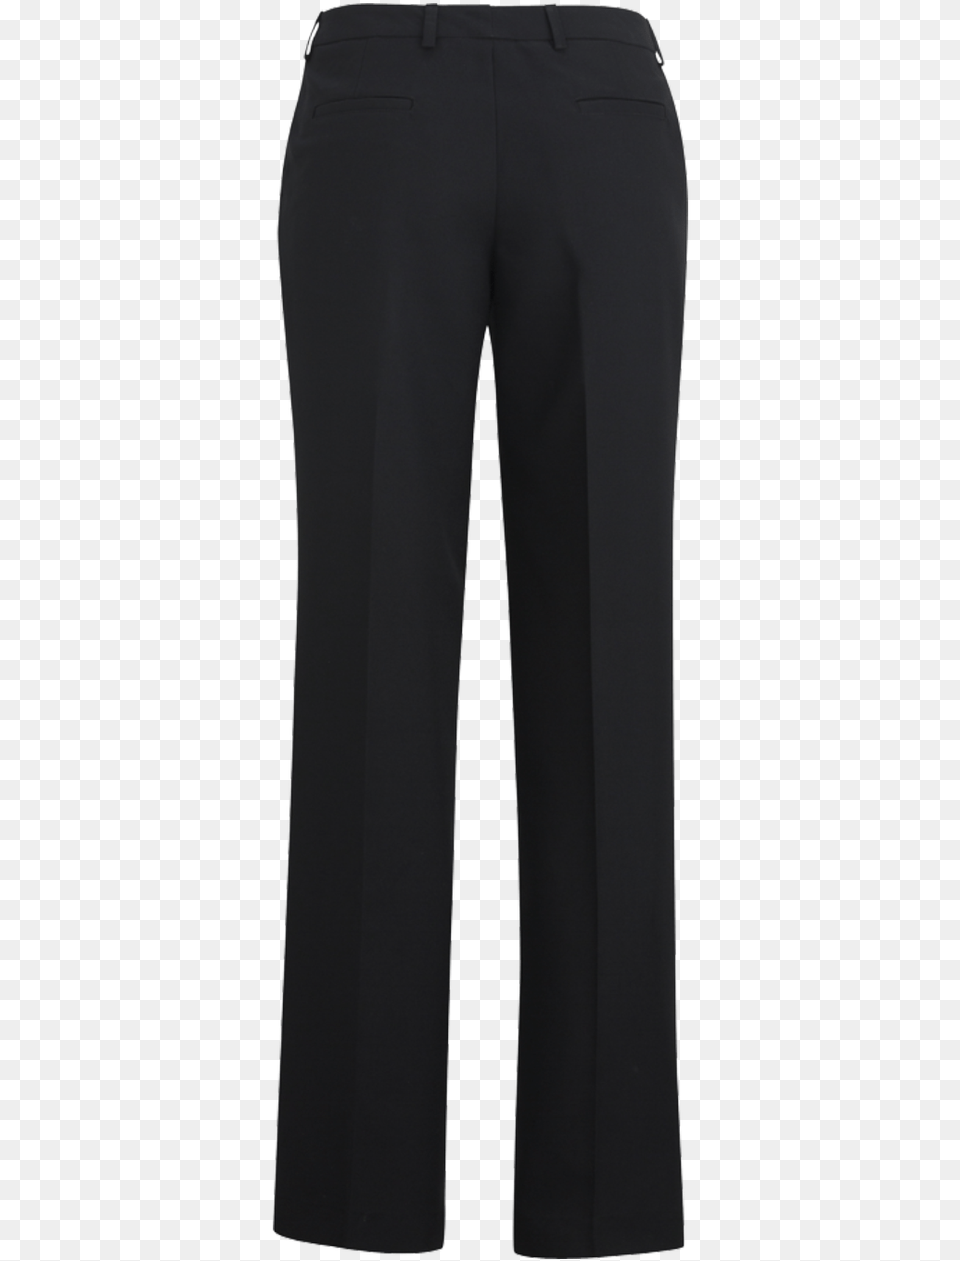 Trousers, Clothing, Pants, Jeans, Shorts Png Image